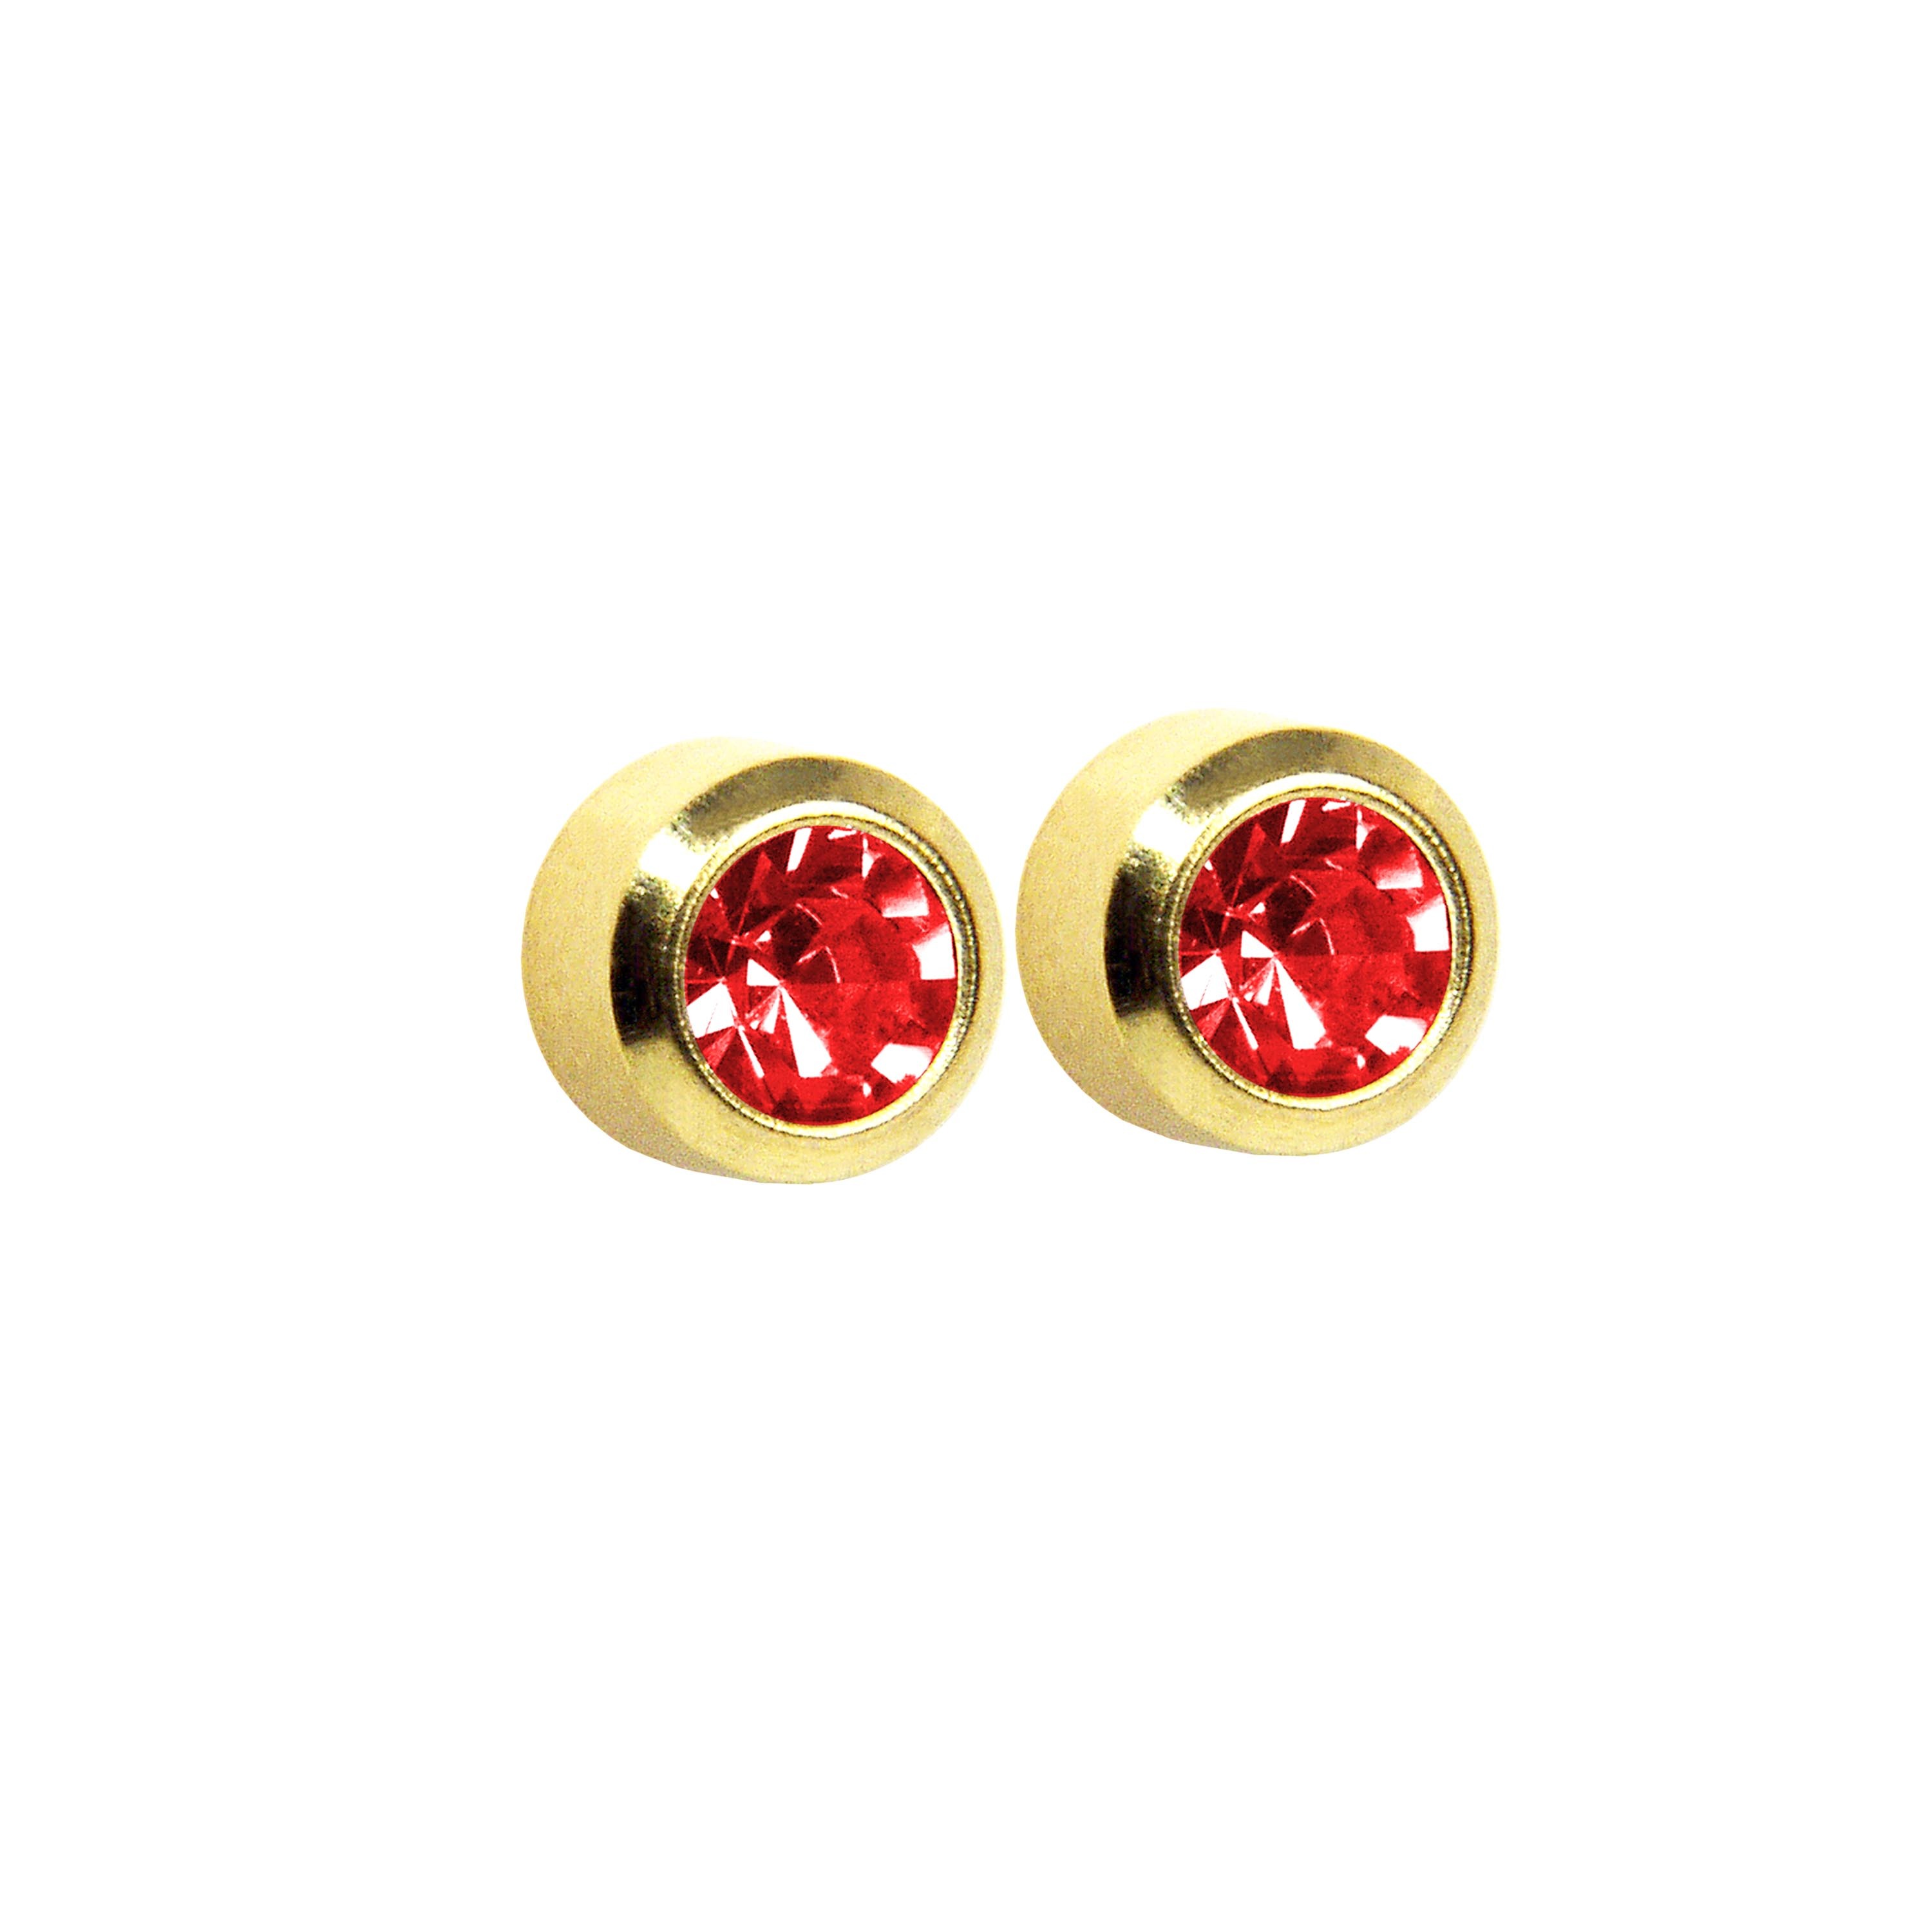 3MM - Bezel - July Ruby - Pinkish Red | 24K Gold Plated Piercing Ear Studs come Fashion Earrings | Studex Select